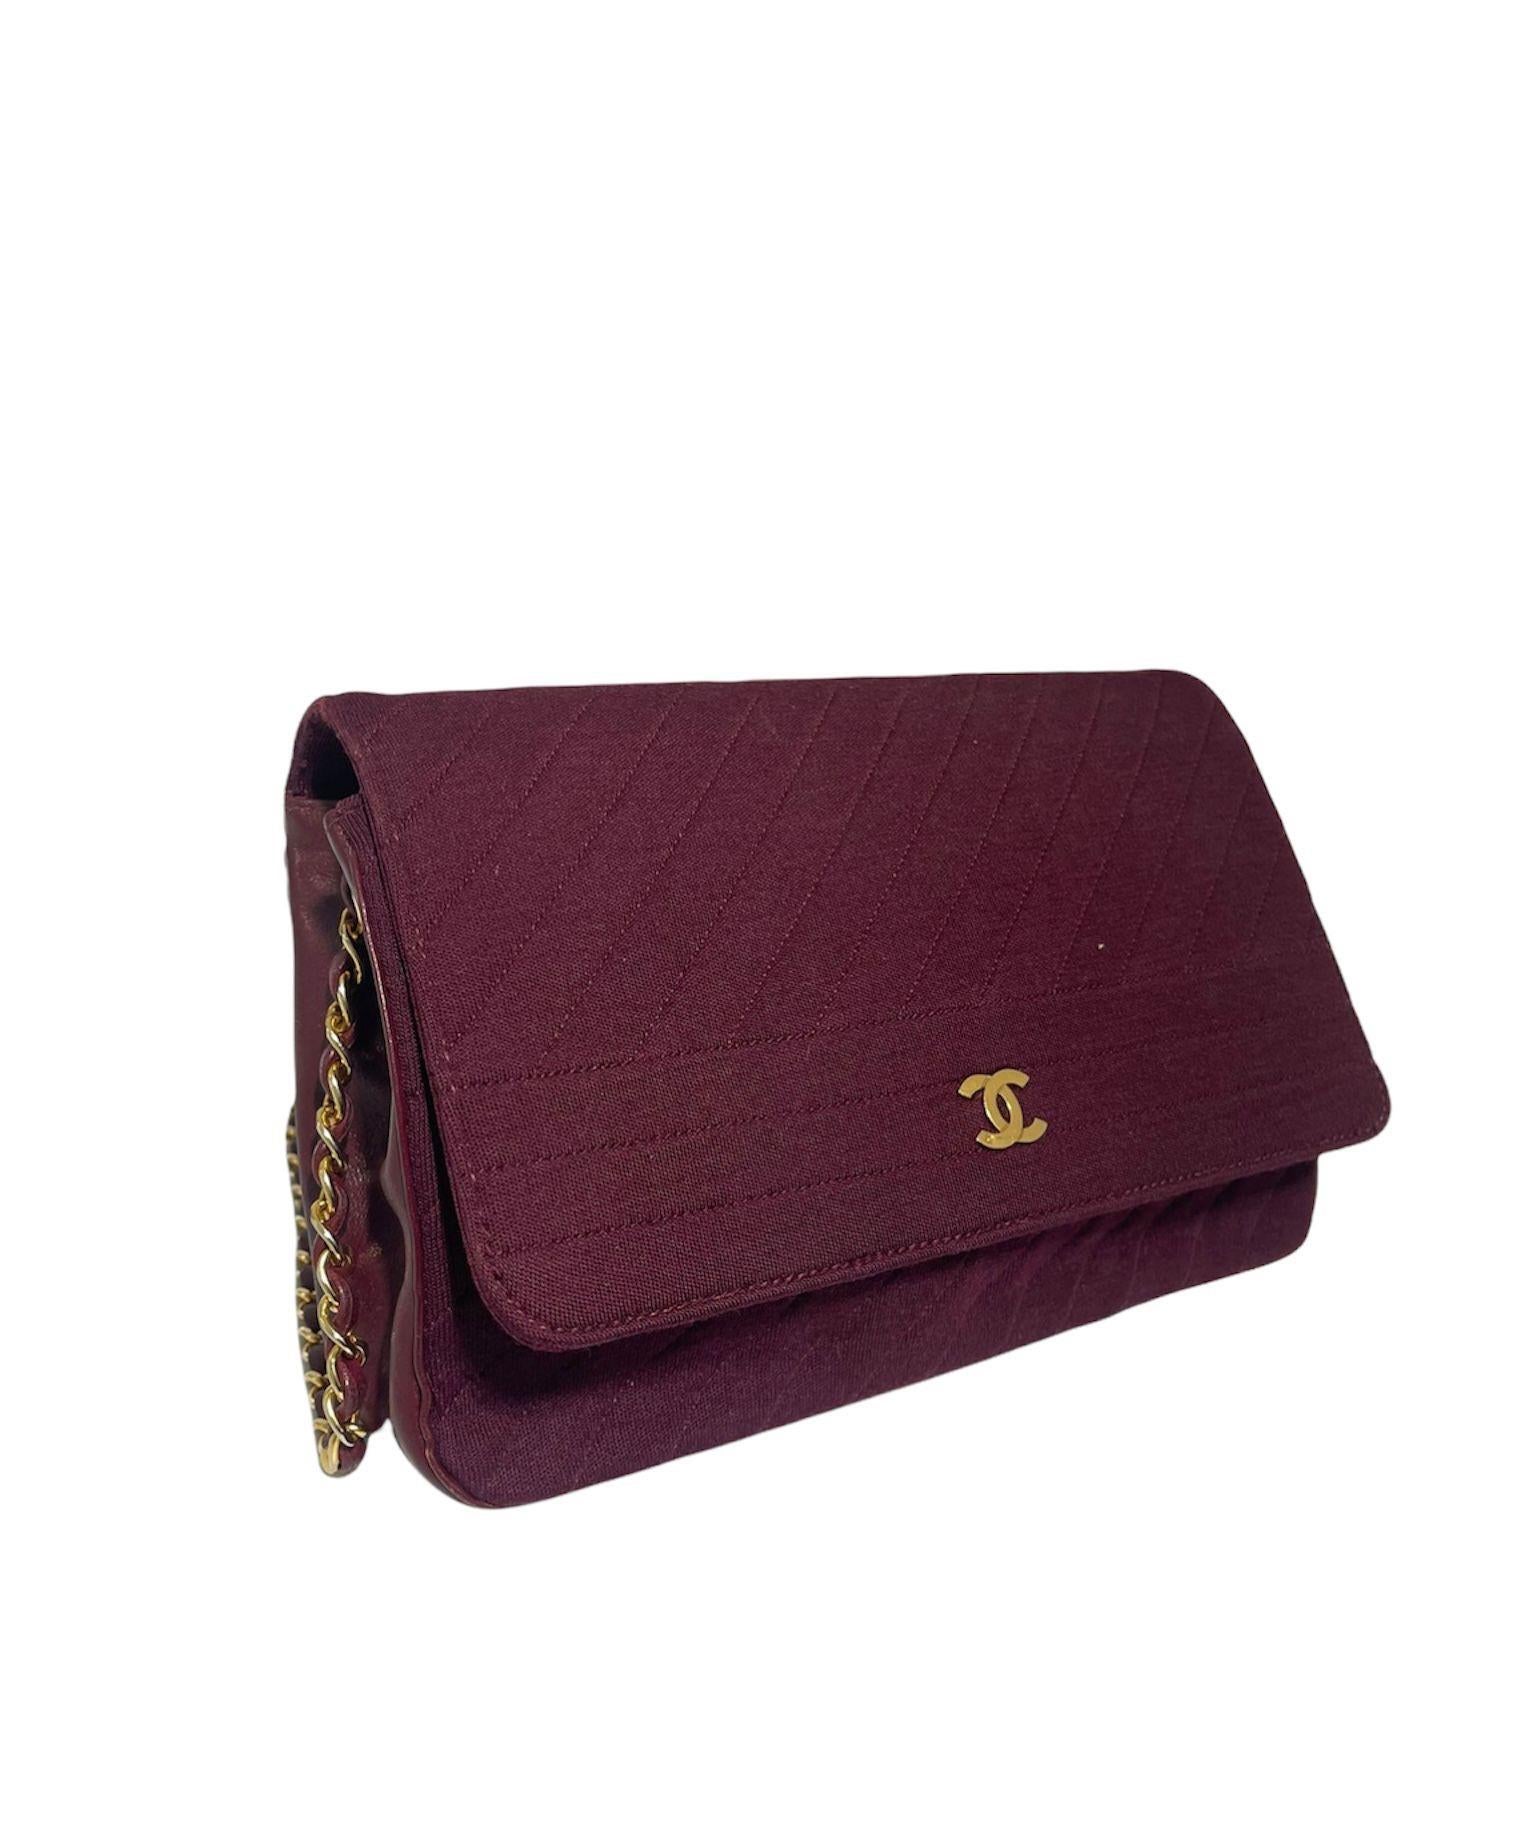 Chanel signed bag, vintage model, made of burgundy fabric with side leather inserts and golden hardware. Equipped with a button closure, internally lined in blue fabric, quite roomy. Equipped with a leather and chain shoulder strap and an inside